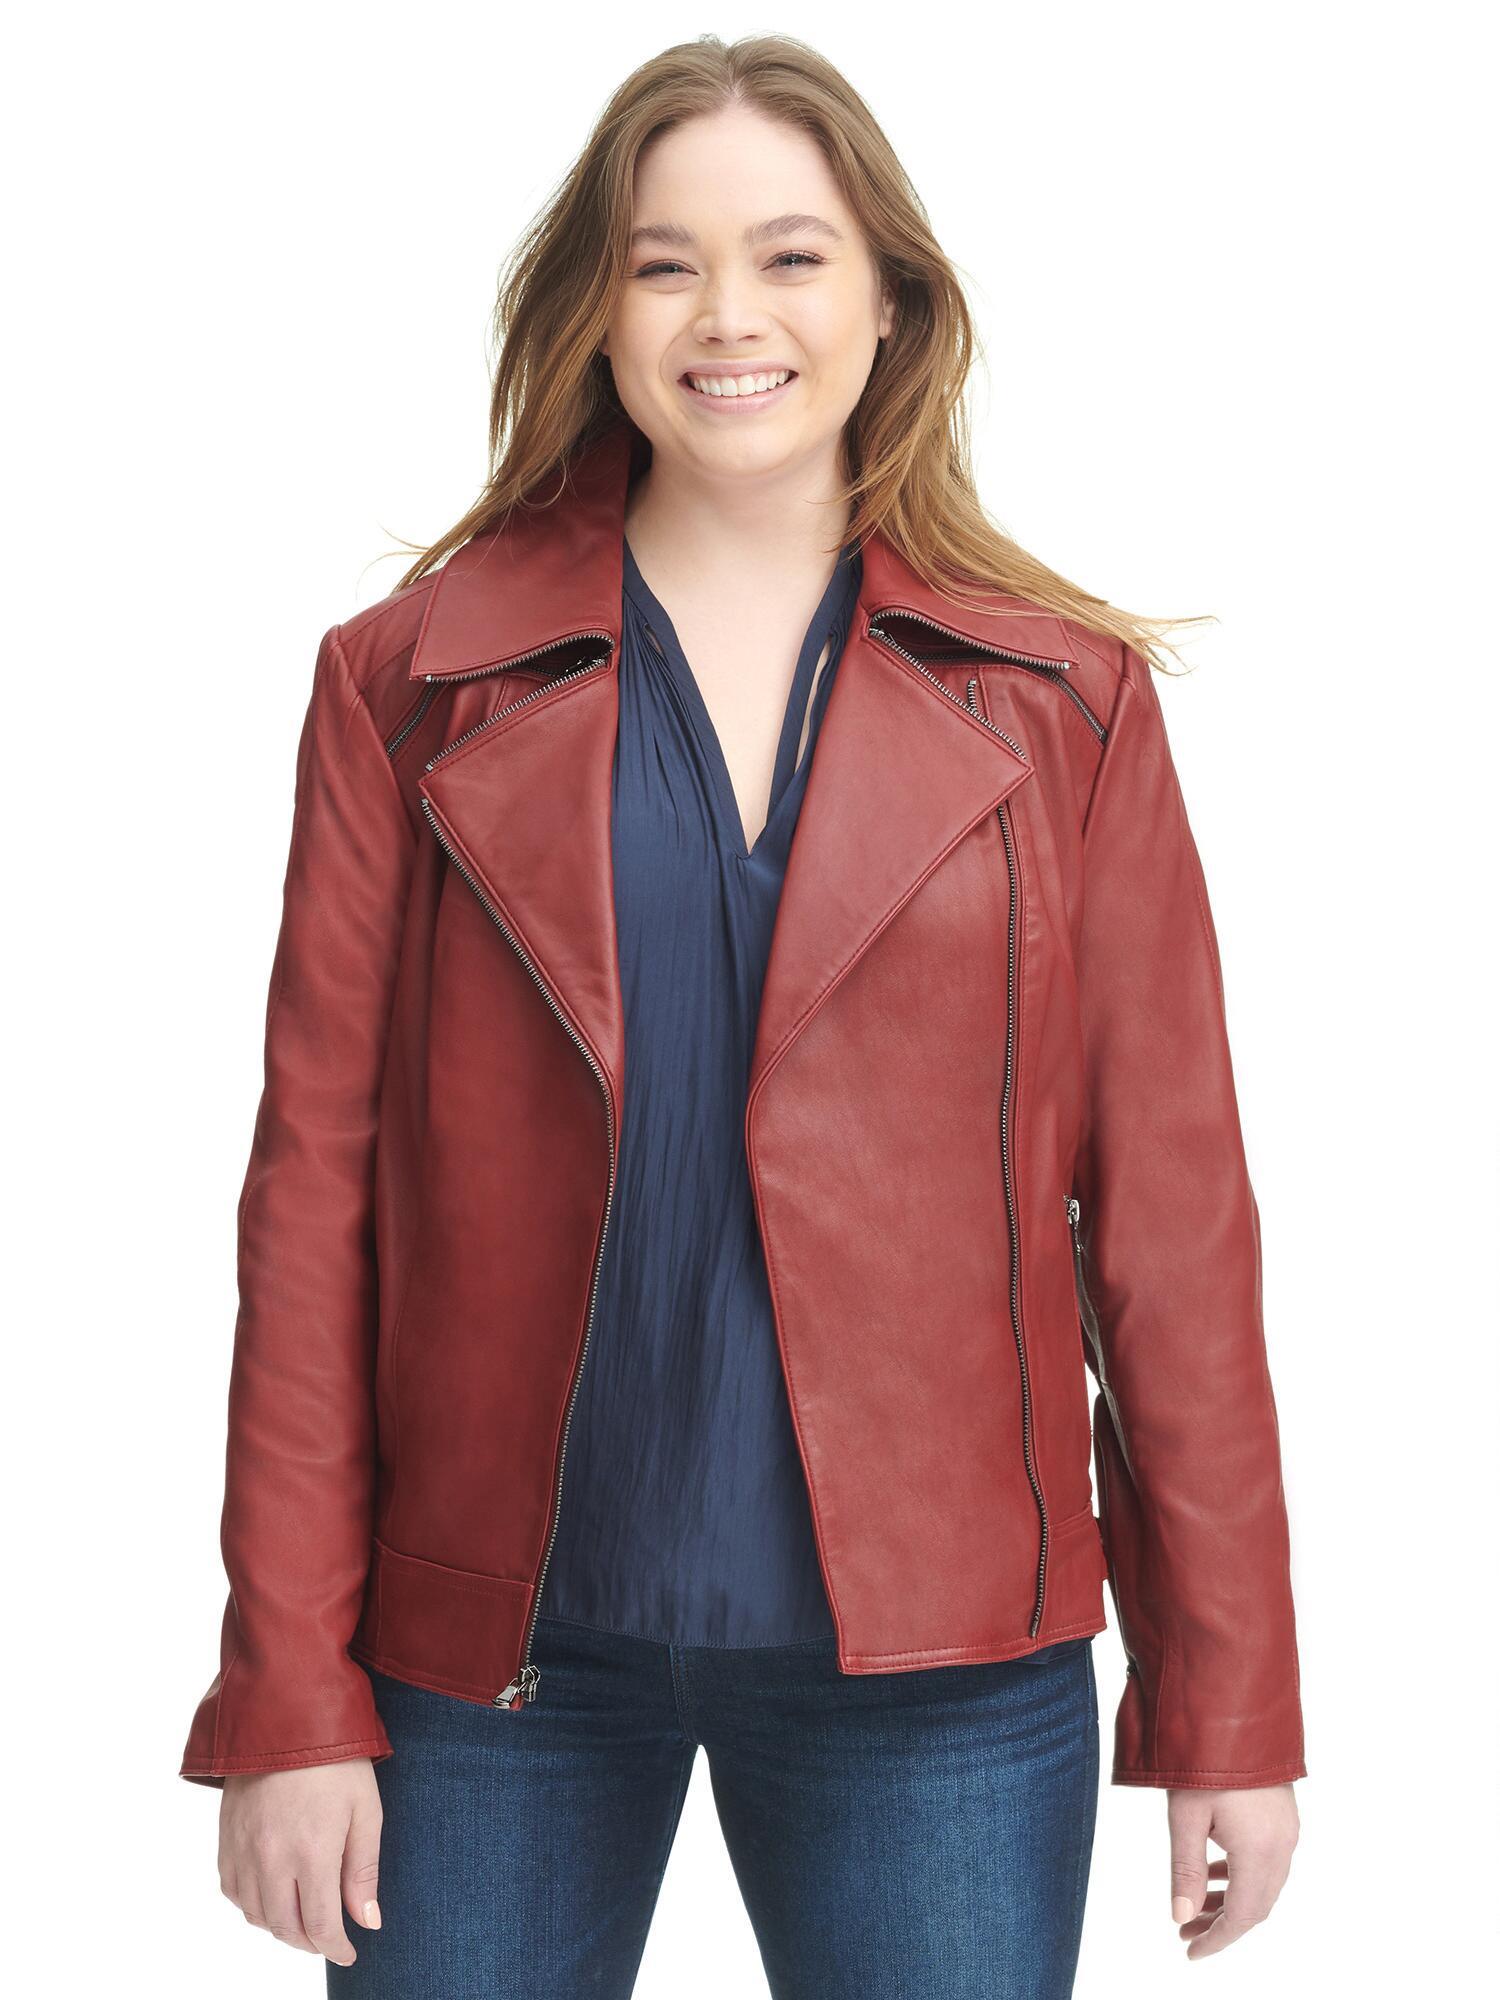 Wilsons Leather Plus Size Leather Jacket With Zipper Details in Red - Lyst